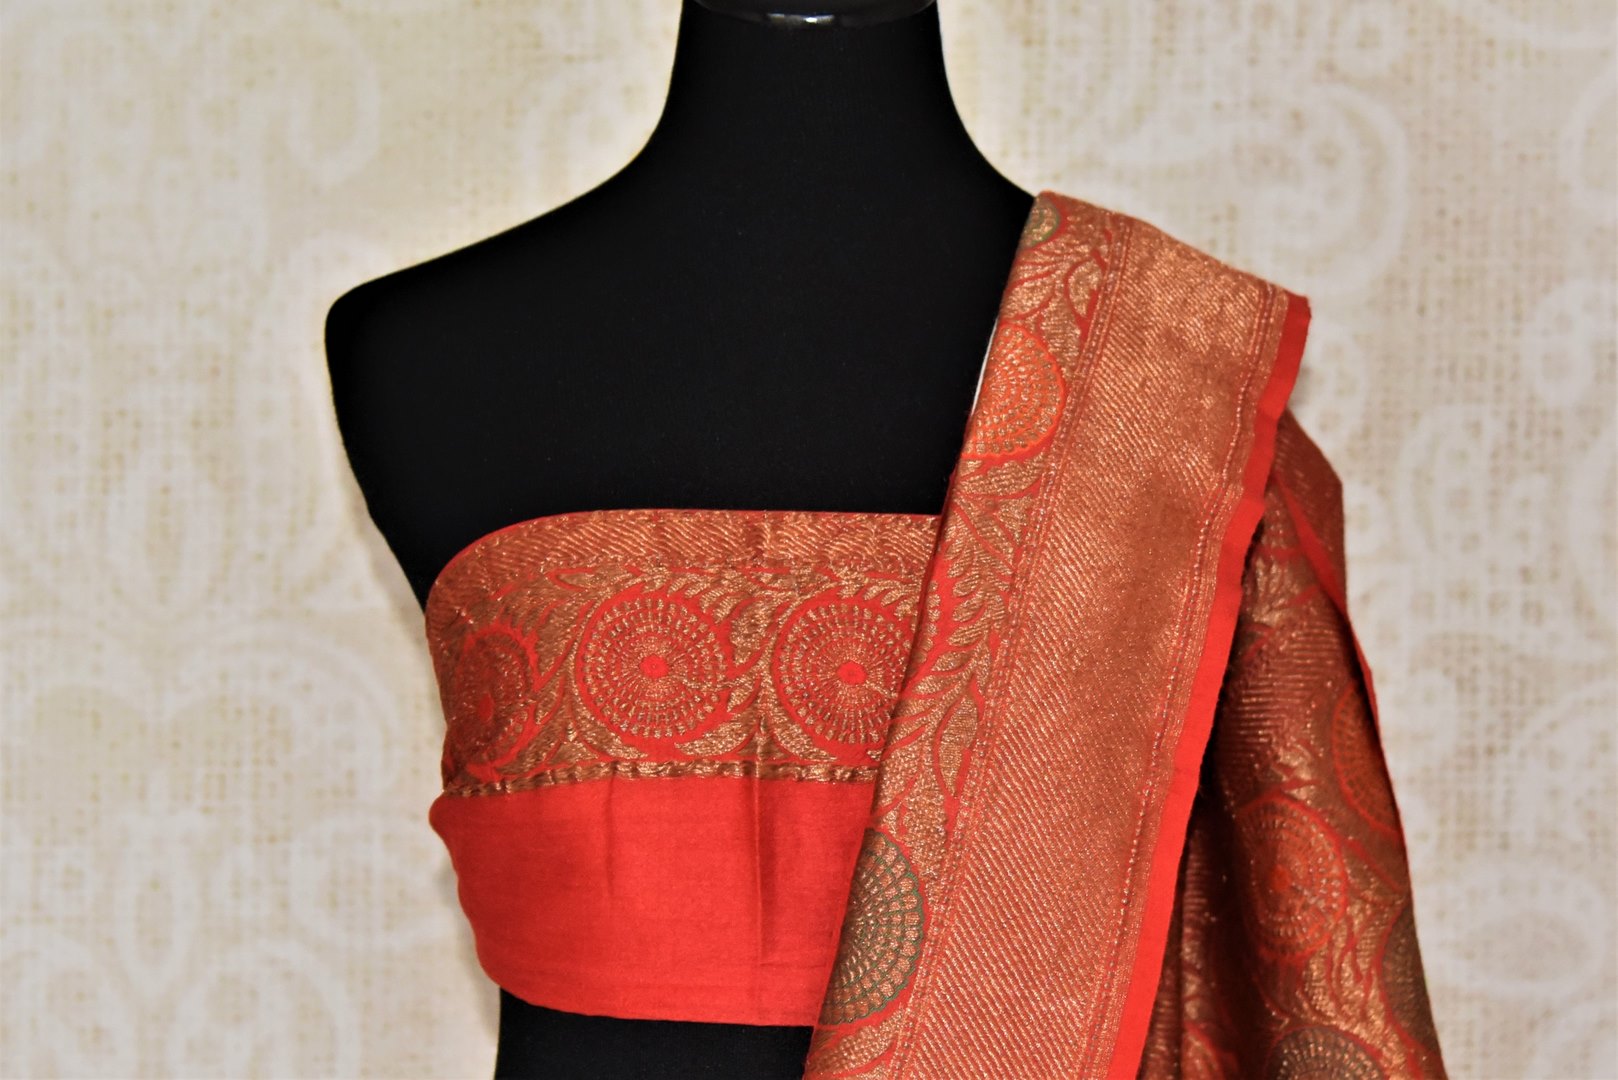 Buy off-white muga Banarasi sari online in USA with red antique zari floral border. Keep your ethnic style updated with latest designer sarees, handloom sarees, pure silk sarees from Pure Elegance Indian fashion store in USA.-blouse pallu